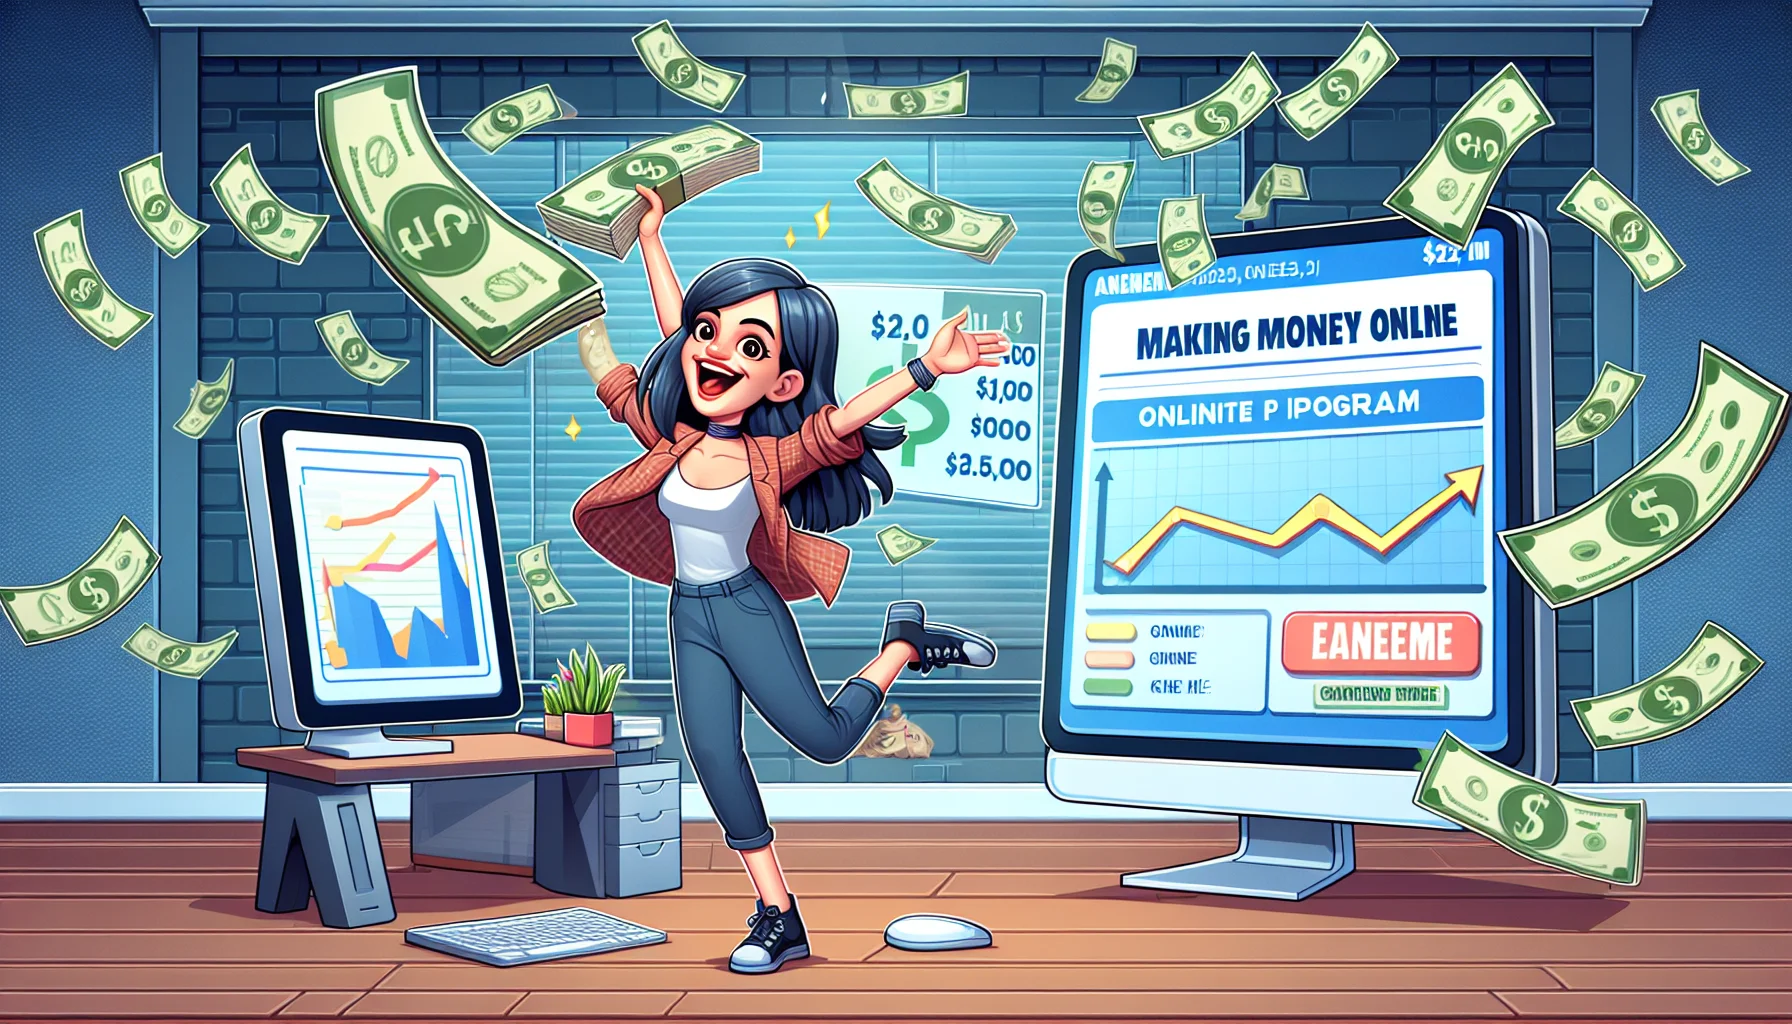 Generate a playful, enticing image showcasing an unnamed generic online entrepreneur's affiliate program. The scene is set in an upbeat virtual office, where animated dollar bills are floating around. On one side, there's a large computer screen displaying real-time stats, illustrating a sharp increase in earnings. On the other side, the entrepreneur, a young, Caucasian woman, is happily dancing while holding a big check symbolic of her affiliate earnings. Add the phrase 'Making Money Online' with comically exaggerated font on the top of the image to highlight the context.